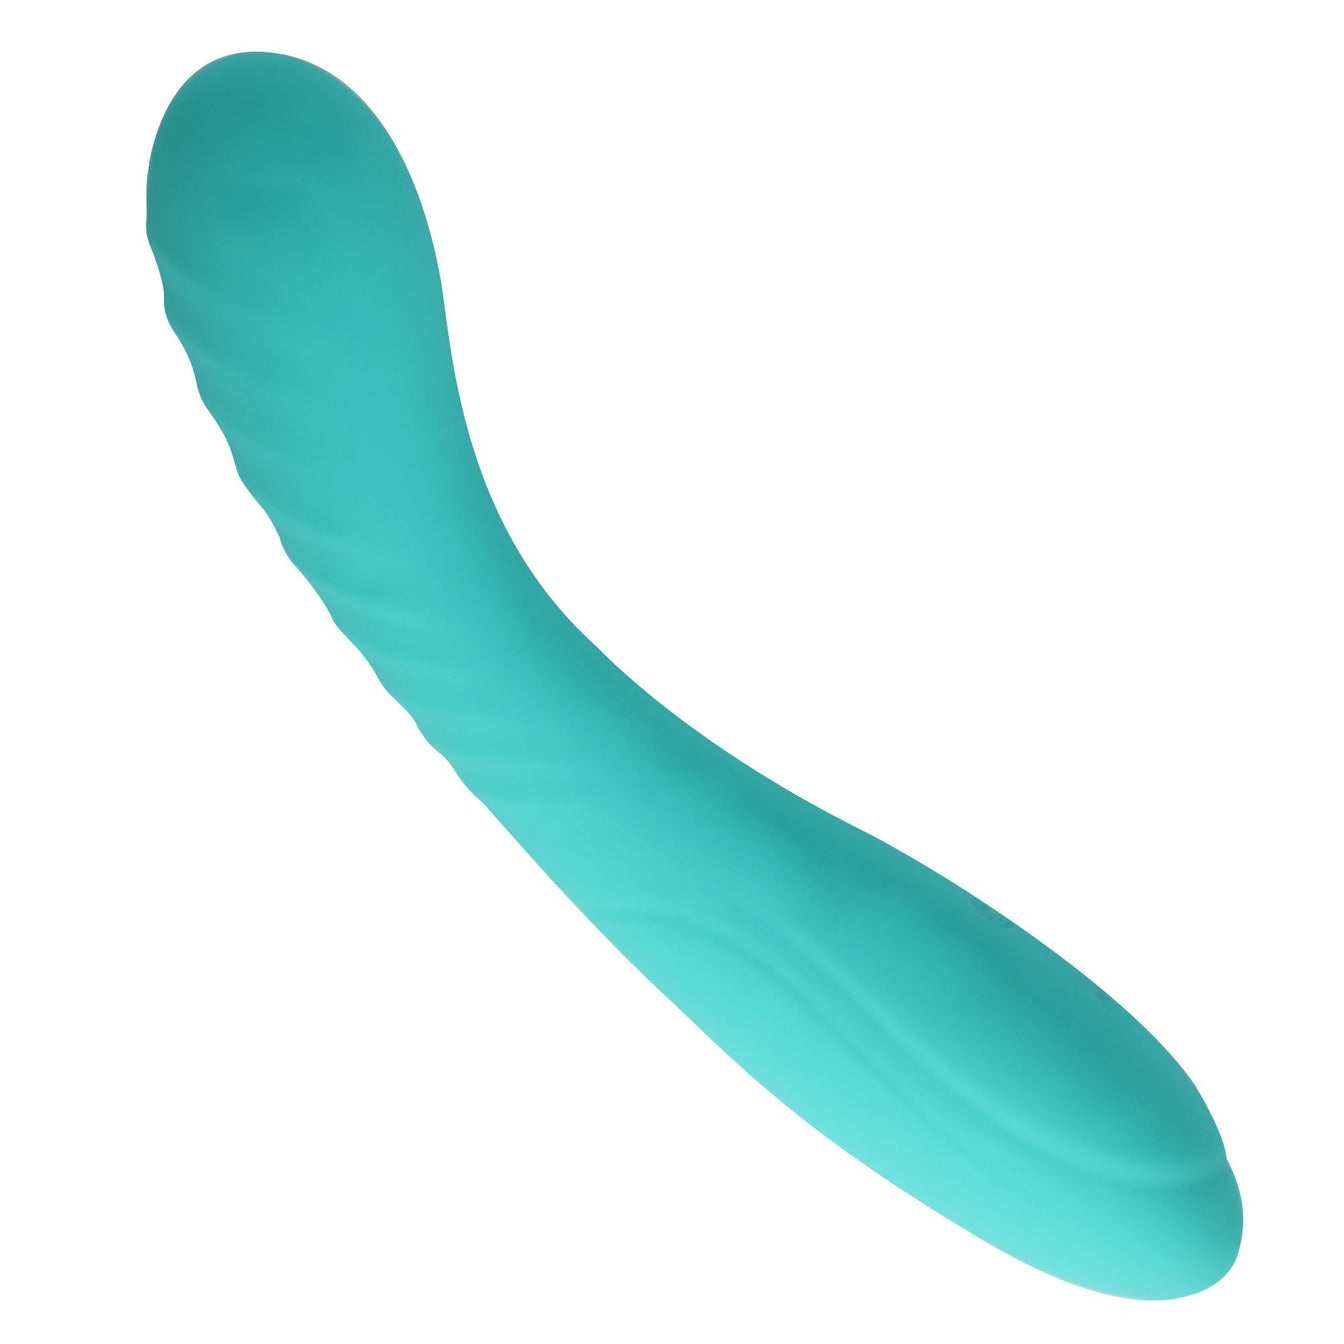 Teal gspot vibrator with bulbous curved tip created specifically to hit your gspot